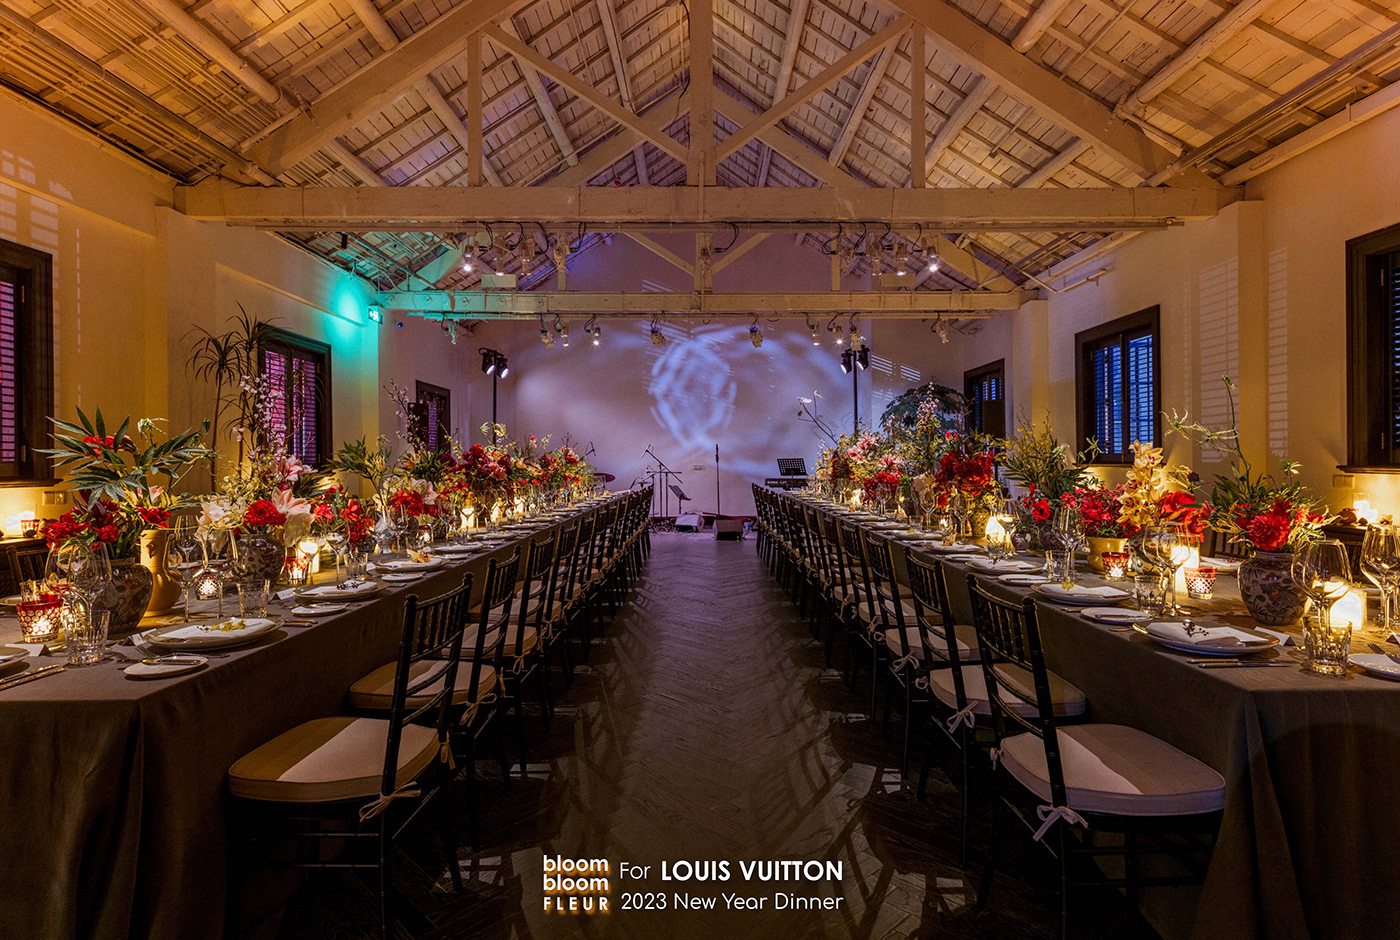 Flowers Louis vuitton luxury brand identity floral dinner Event party